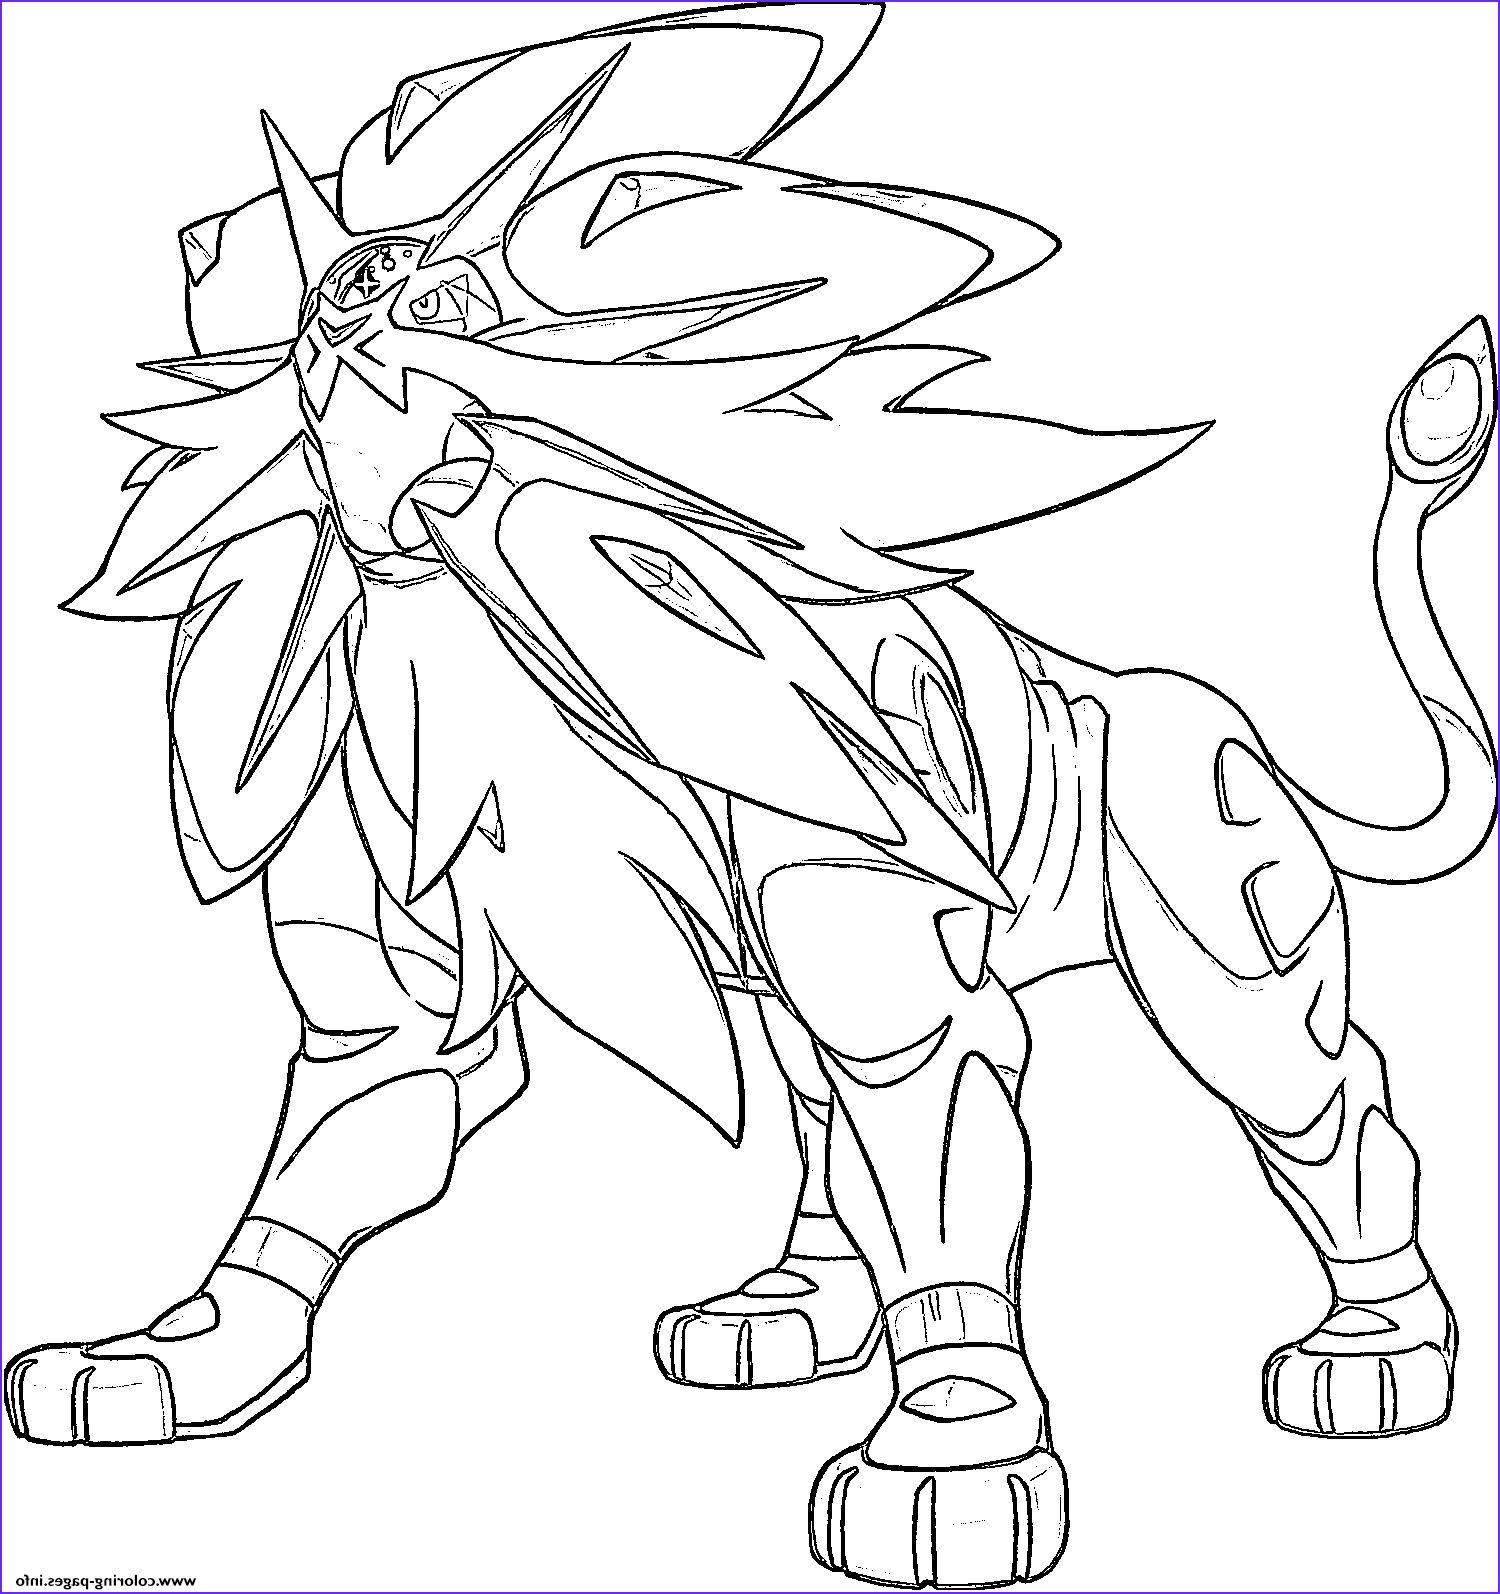 Solgaleo Coloring Page - Bmo Show